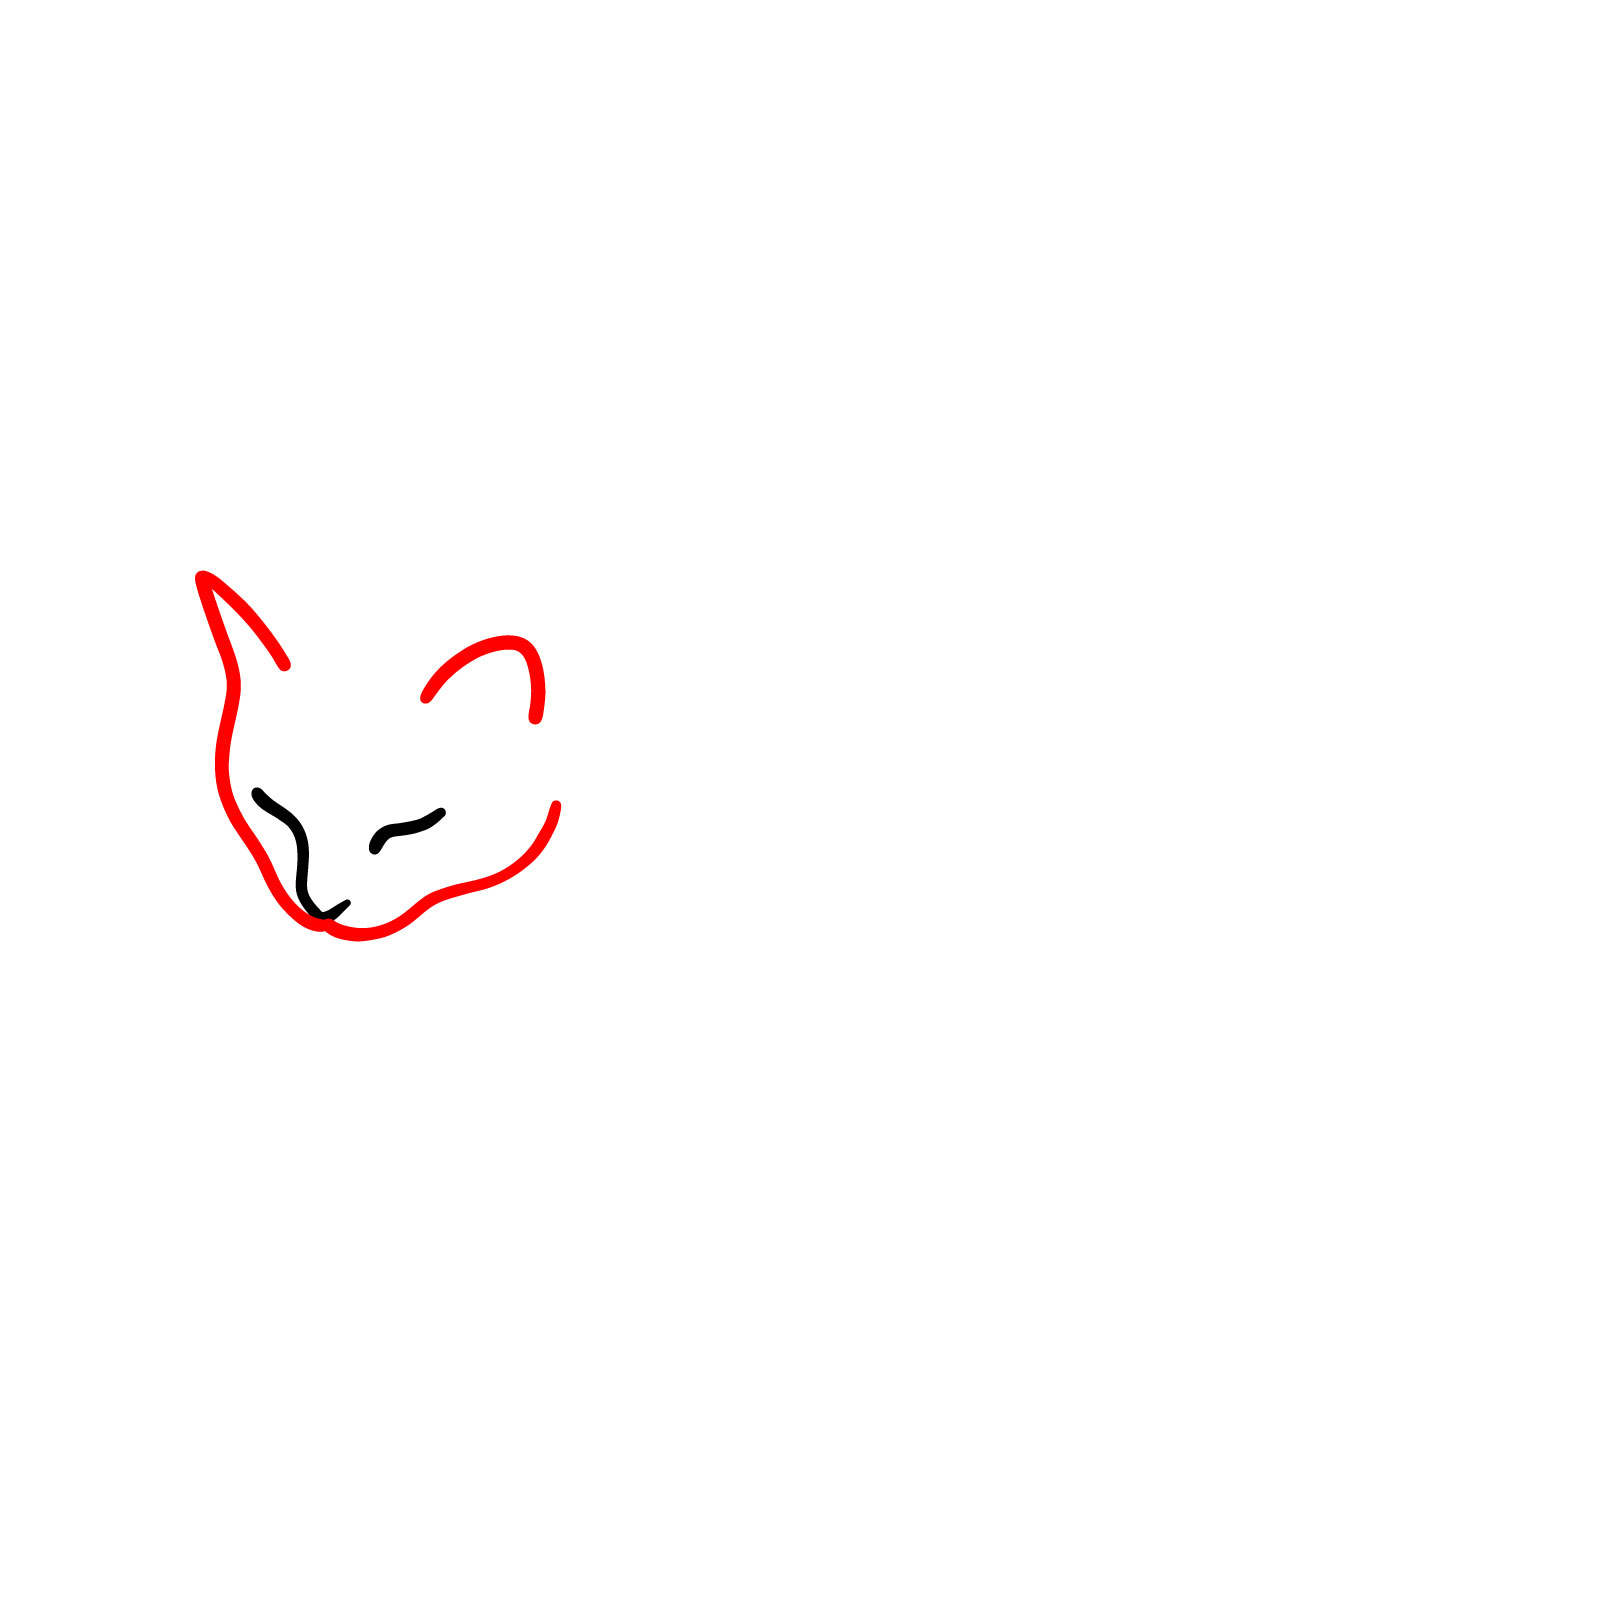 Outline of a cat's head and ears in a minimalistic style - step 02